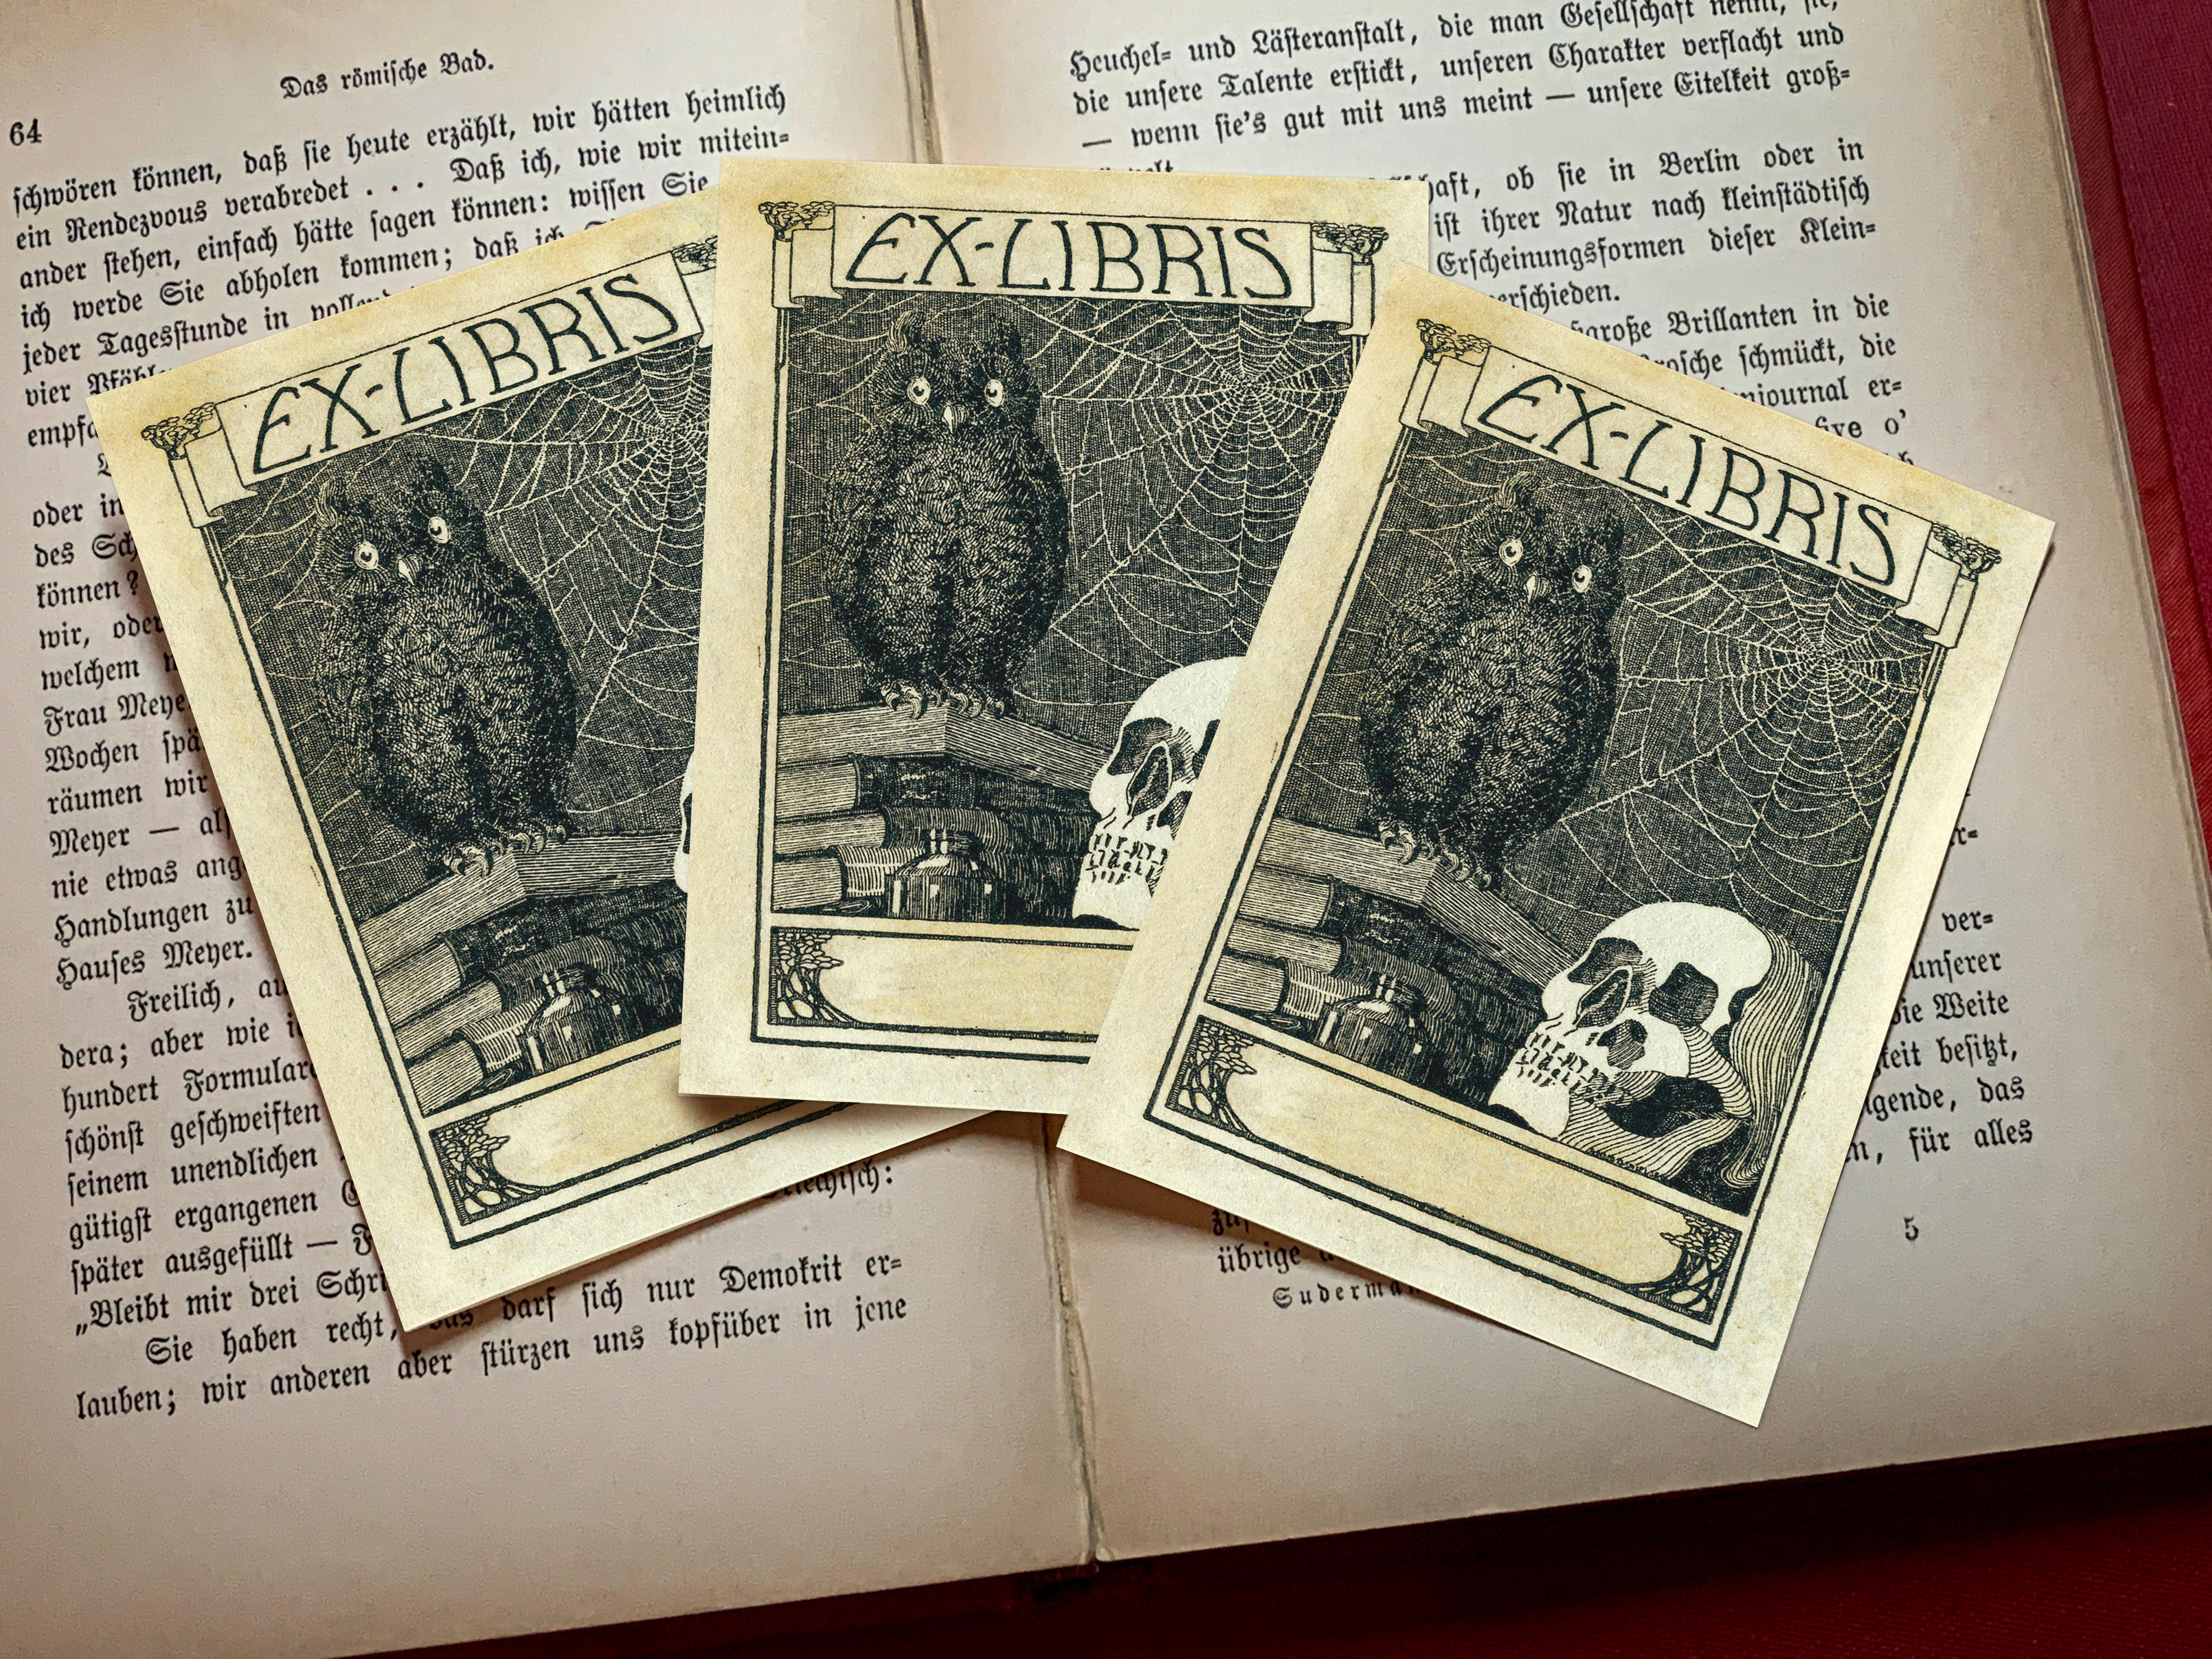 Skull and Owl, Personalized Gothic Ex-Libris Bookplates, Crafted on Traditional Gummed Paper, 3in x 4in, Set of 30